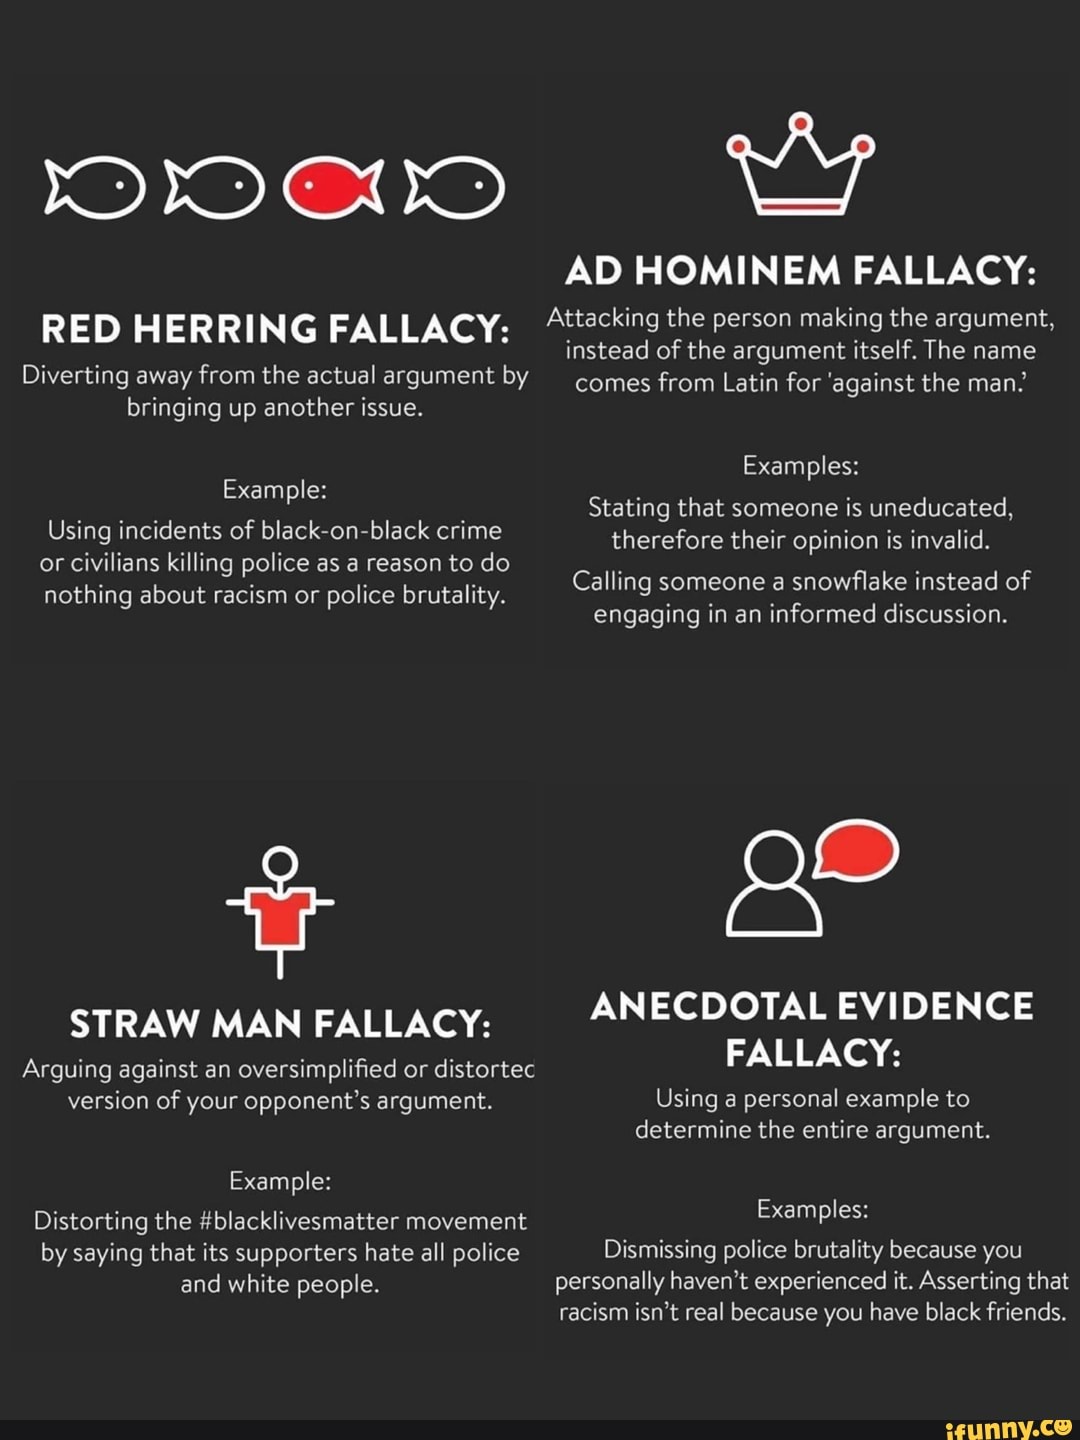 red herring fallacy in movies